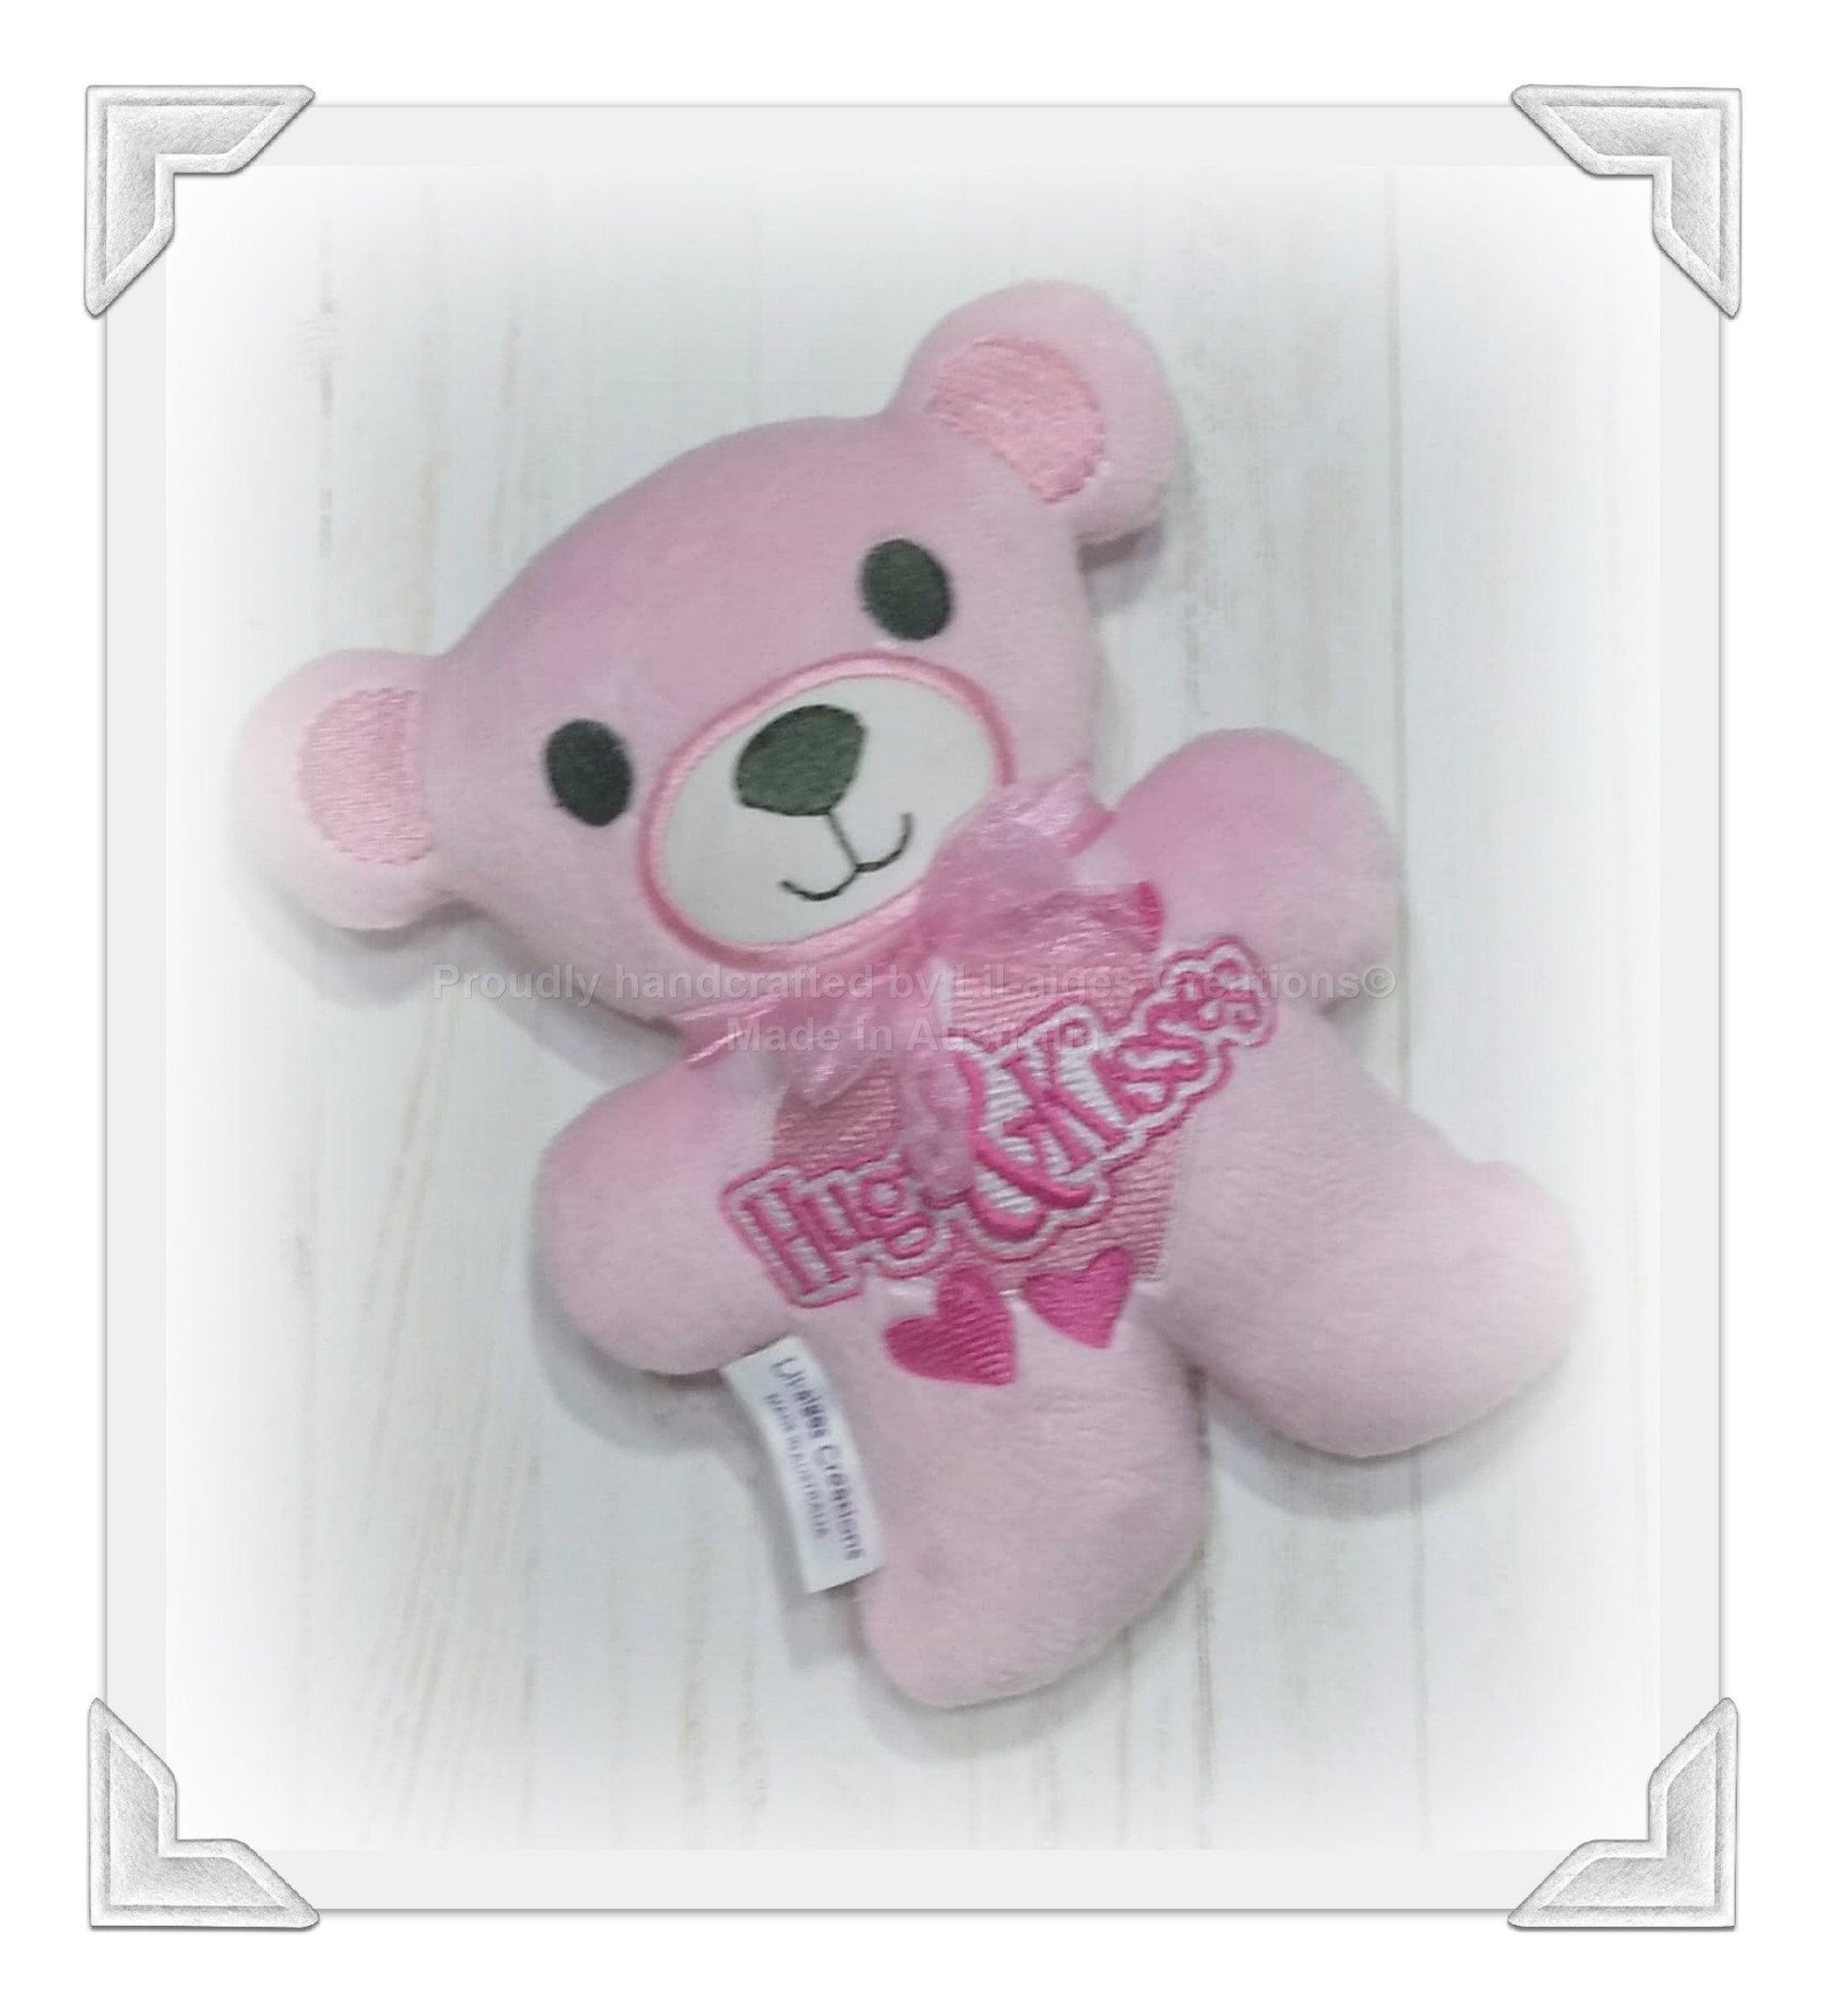 Pink plush minky teddy bear, hugs and kisses, ready to ship, made in Australia - Lil-aiges Creations - Quality Australian-made Gifts